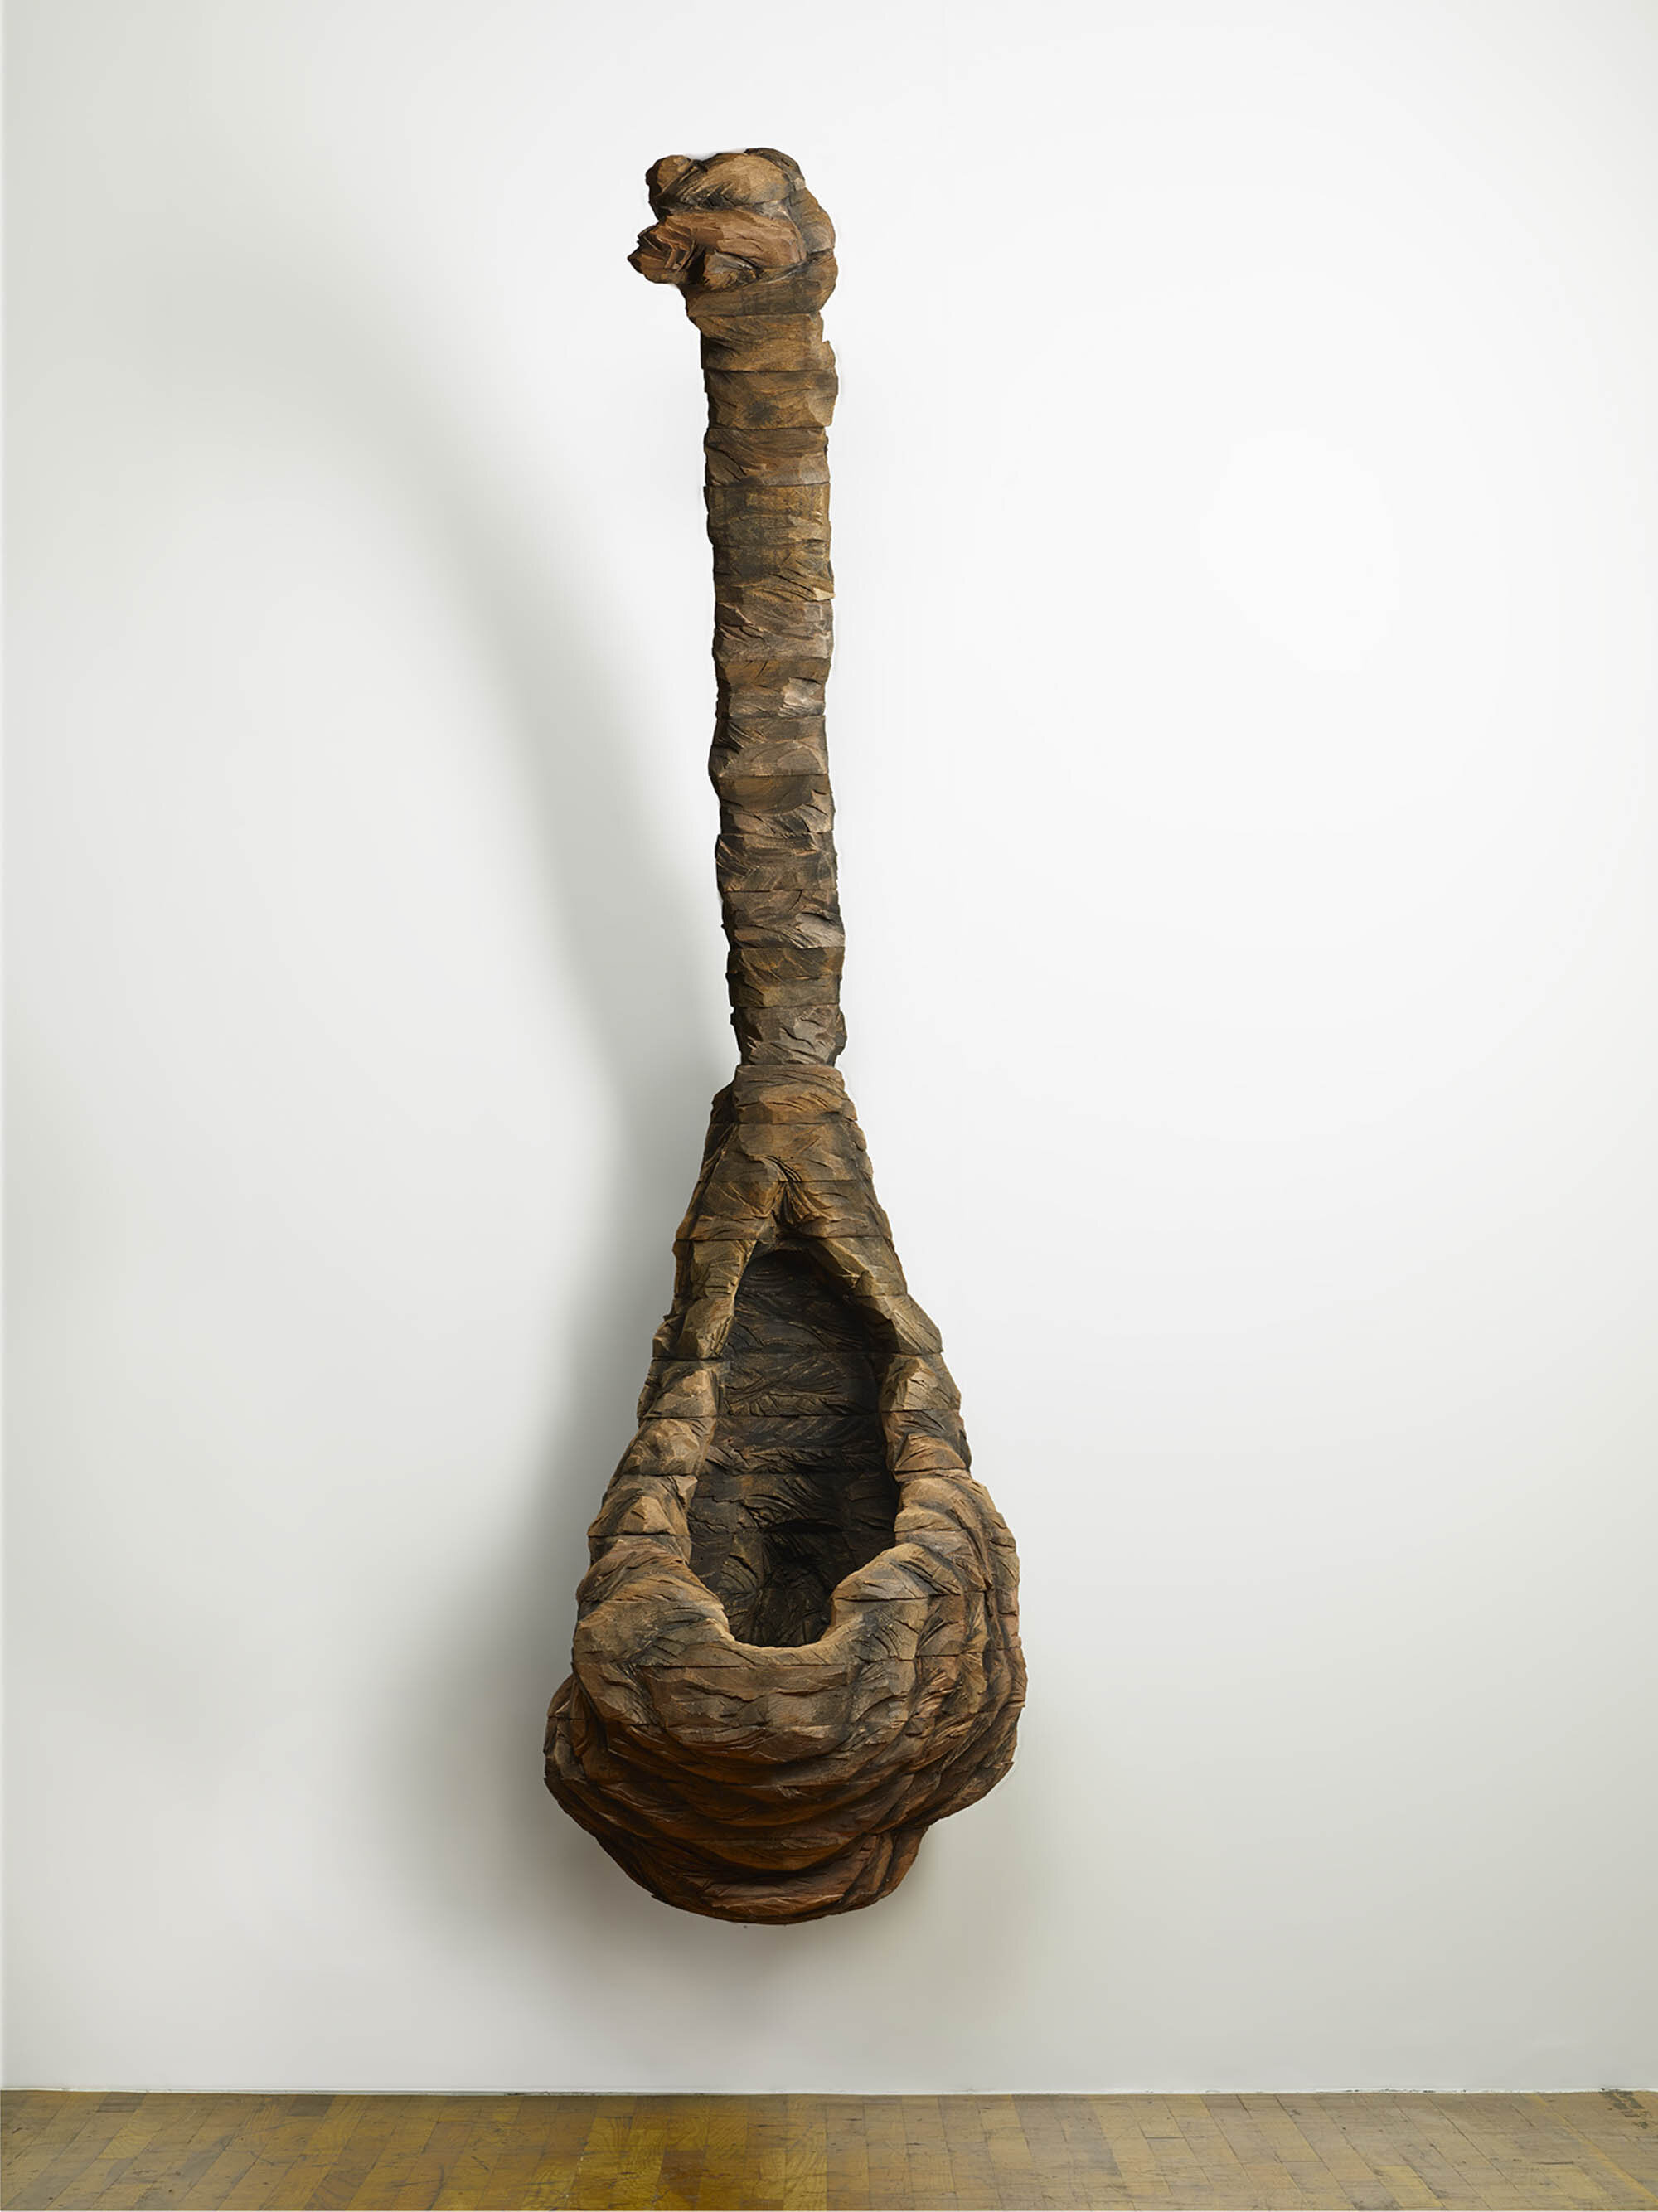       Braided Ladle , 2014 Cedar and graphite 102 x 28 x 26 in.    MORE IMAGES   Princeton University Art Museum  